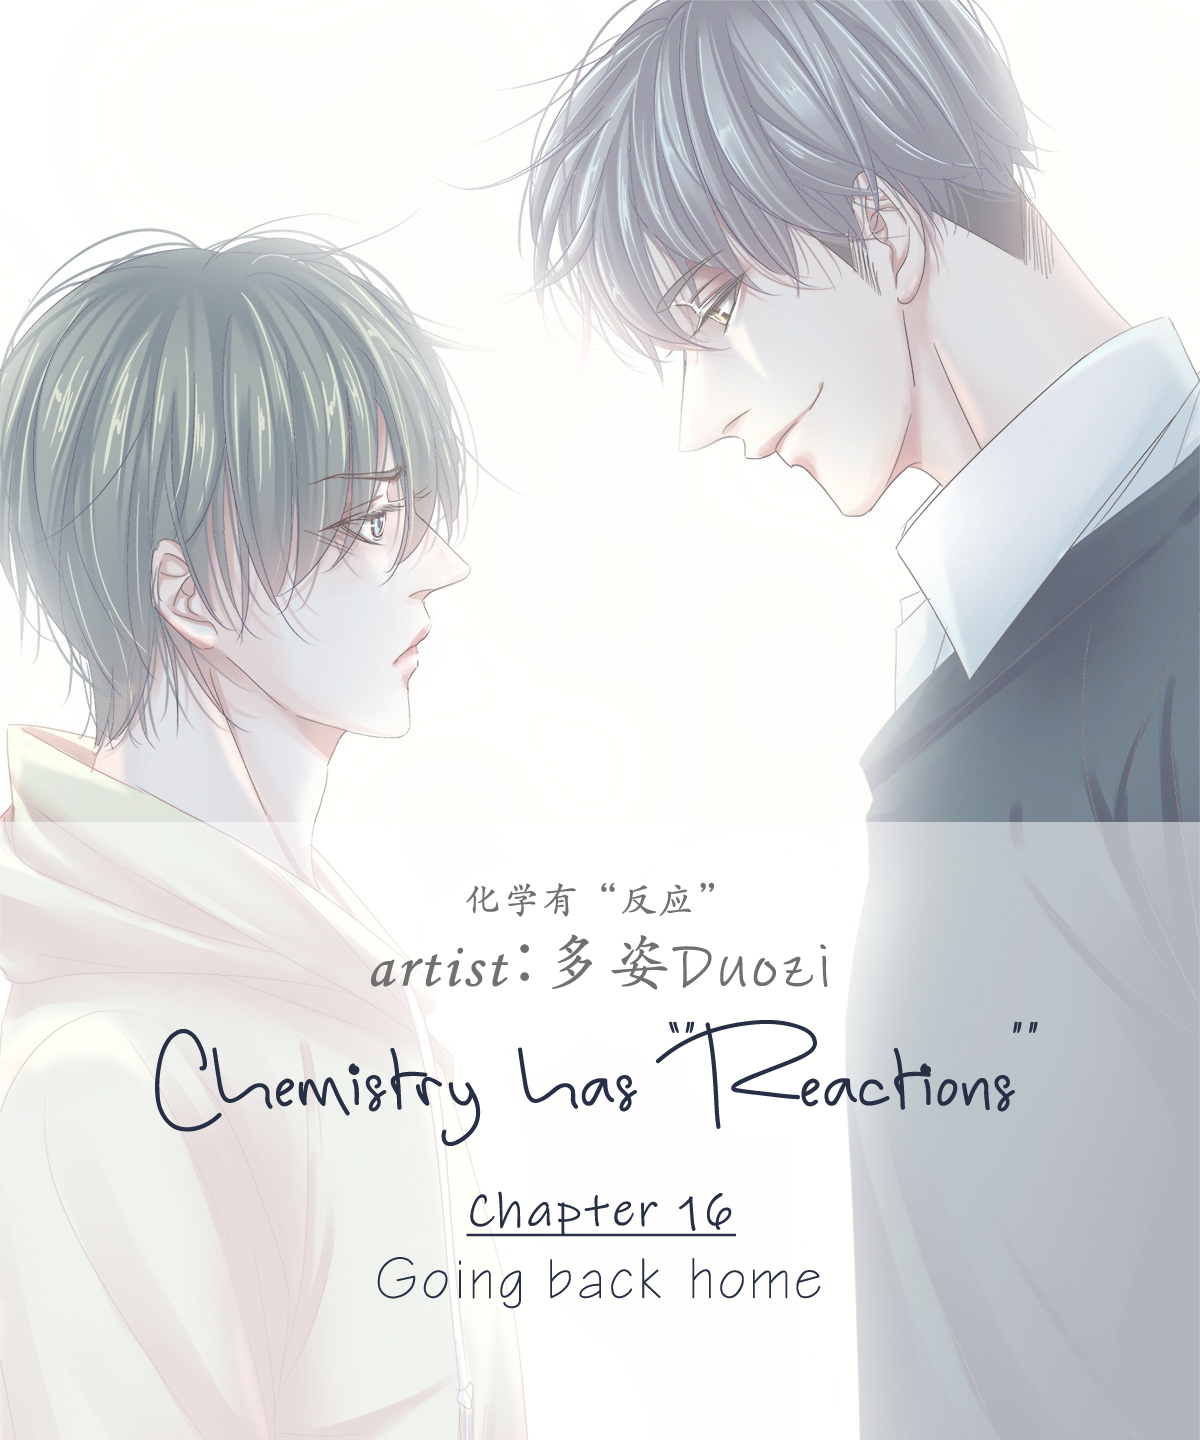 Chemistry has "Reactions" Vol. 1 Ch. 16